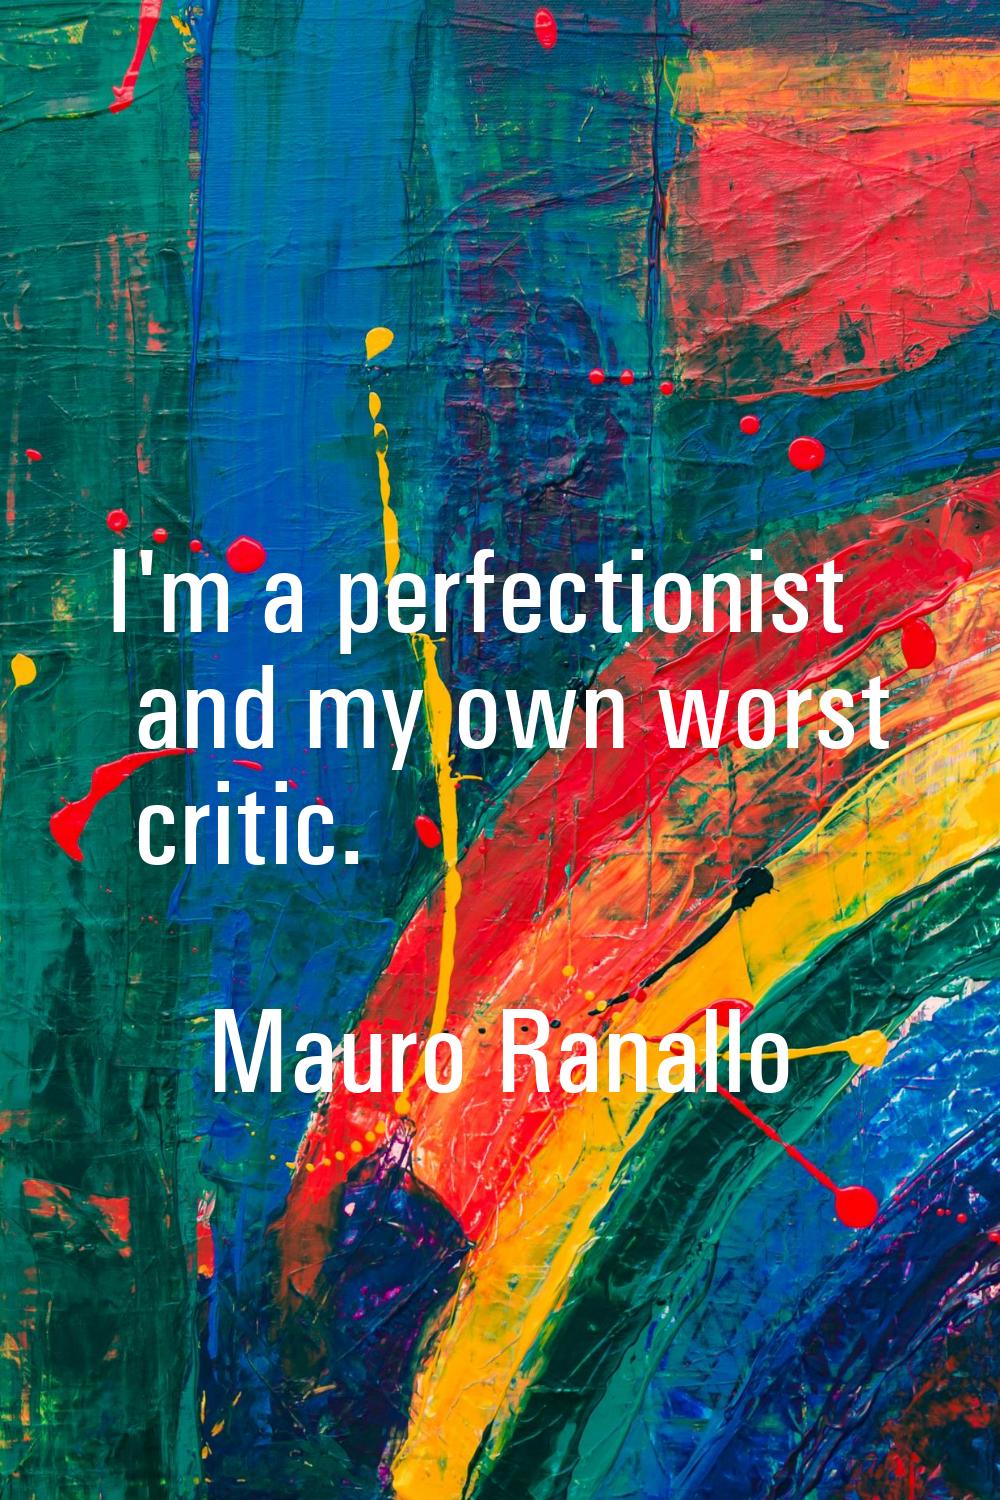 I'm a perfectionist and my own worst critic.